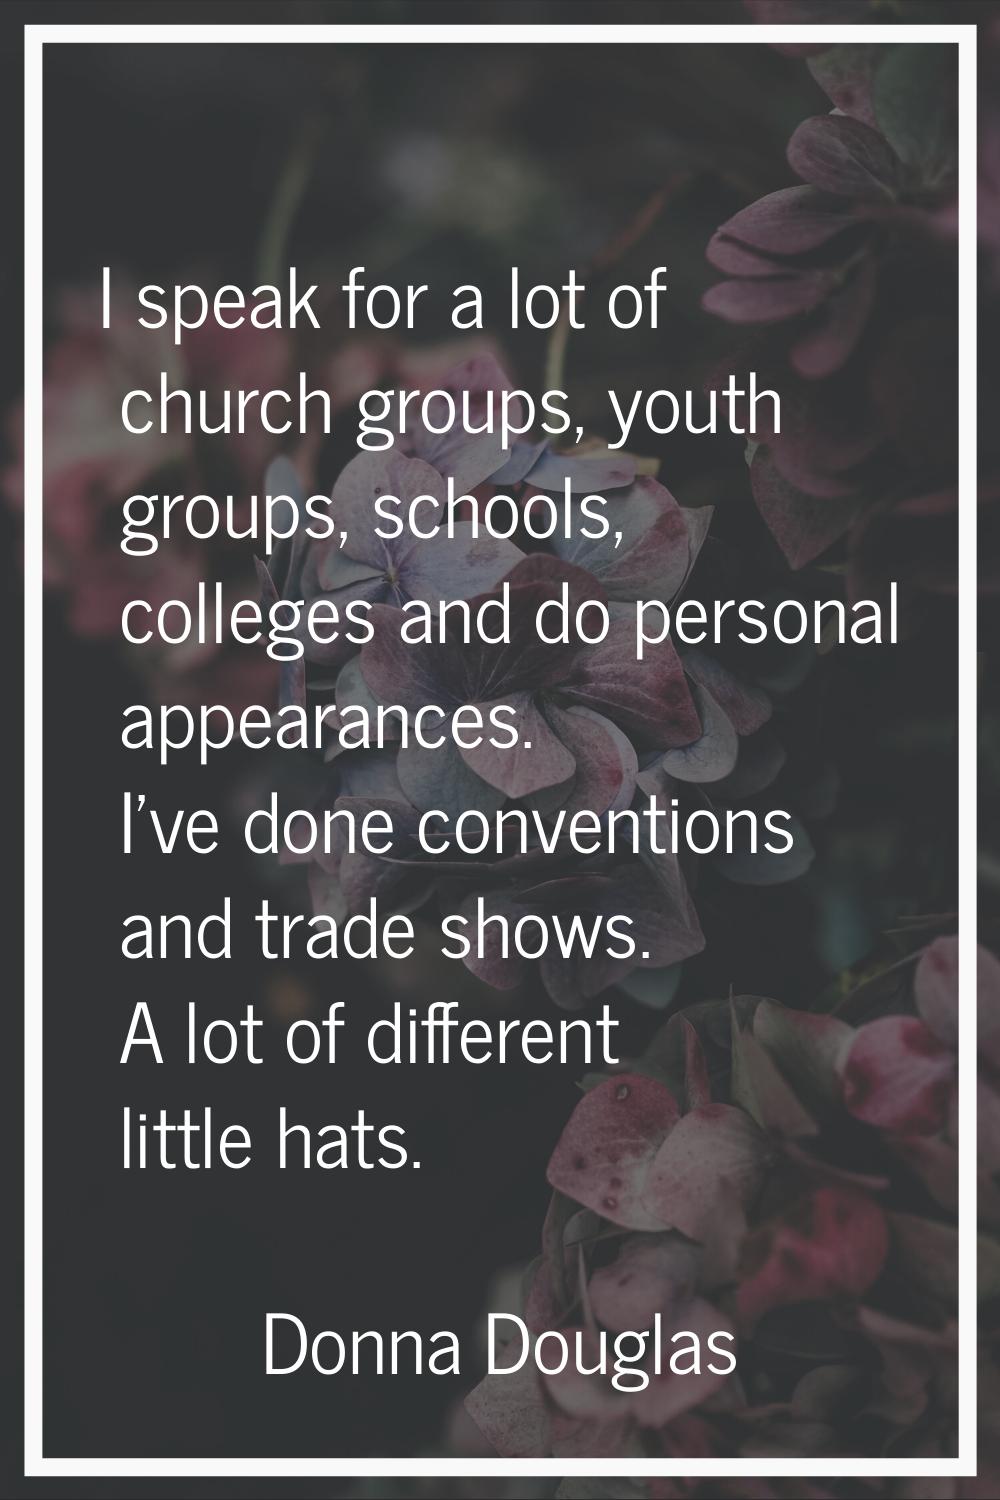 I speak for a lot of church groups, youth groups, schools, colleges and do personal appearances. I'